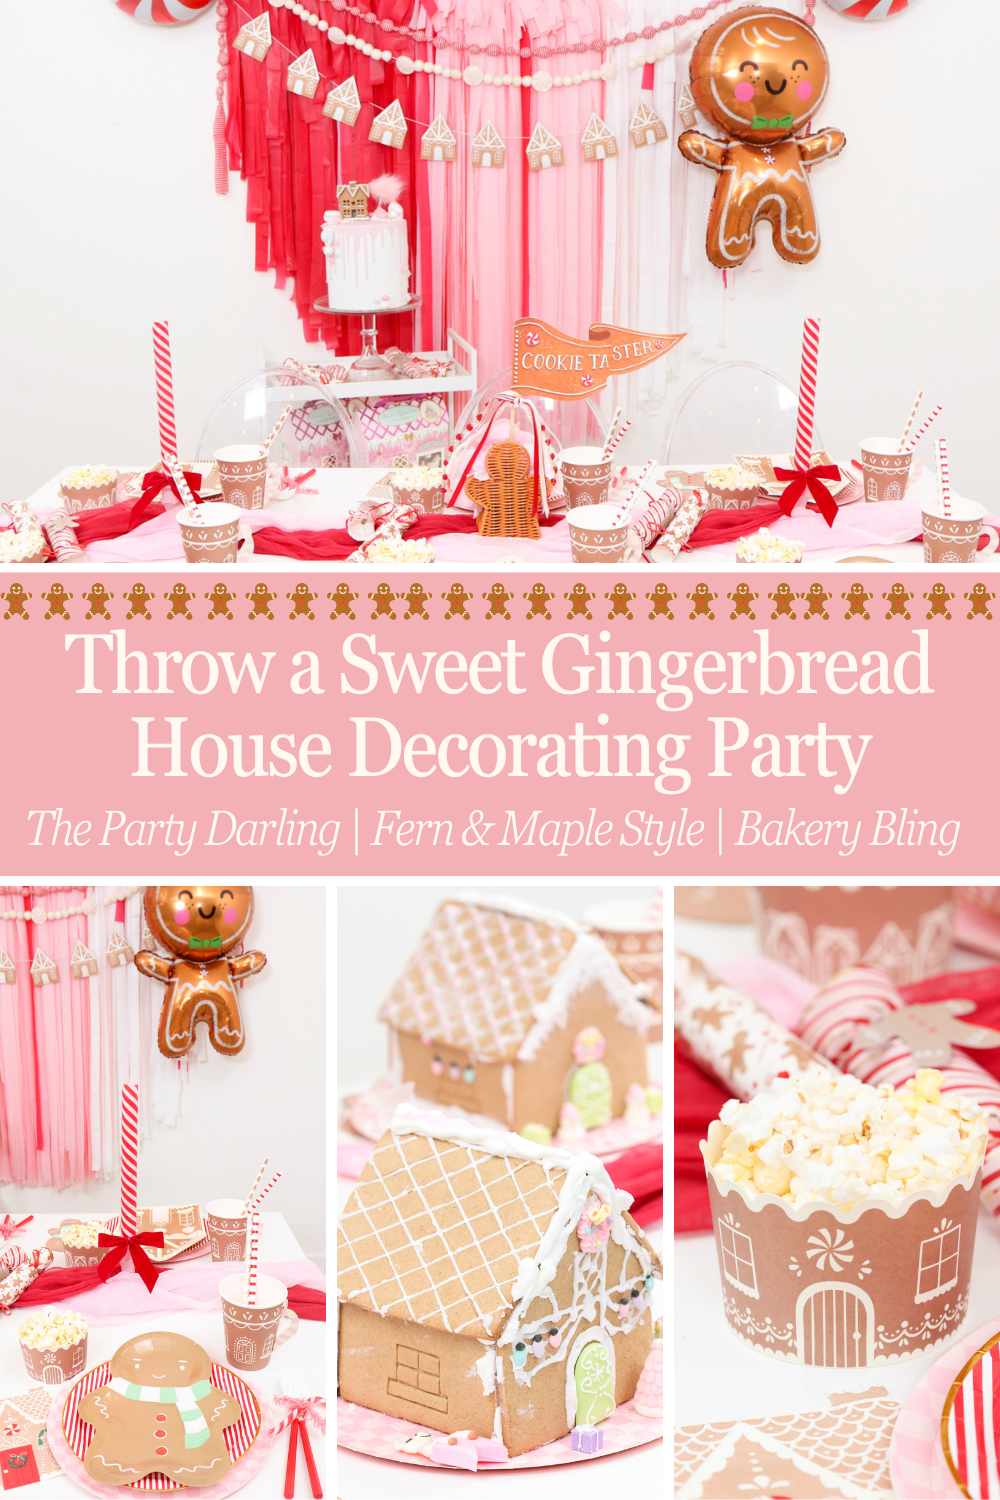 Throw a Sweet Gingerbread House Decorating Party | The Party Darling | Fern and Maple Style | Bakery Bling